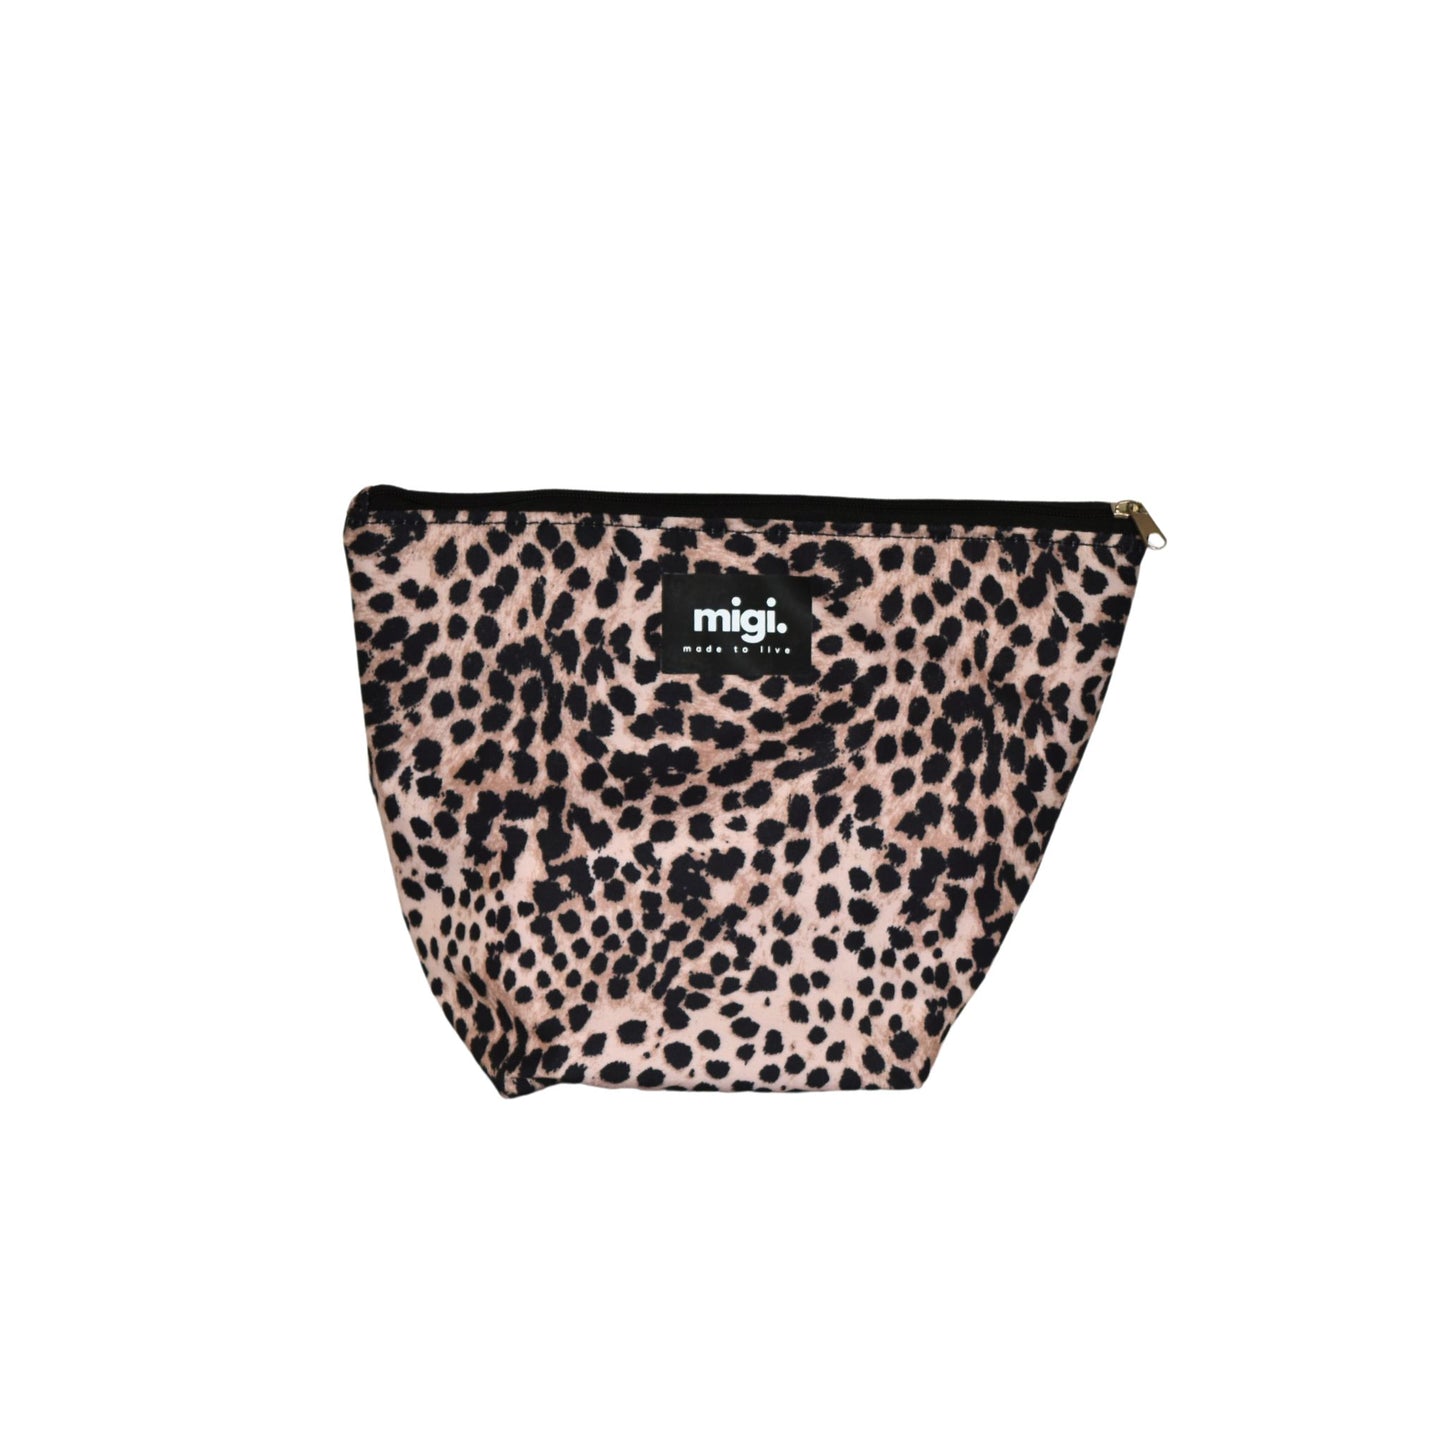 The Beth Large Cosmetic Bag